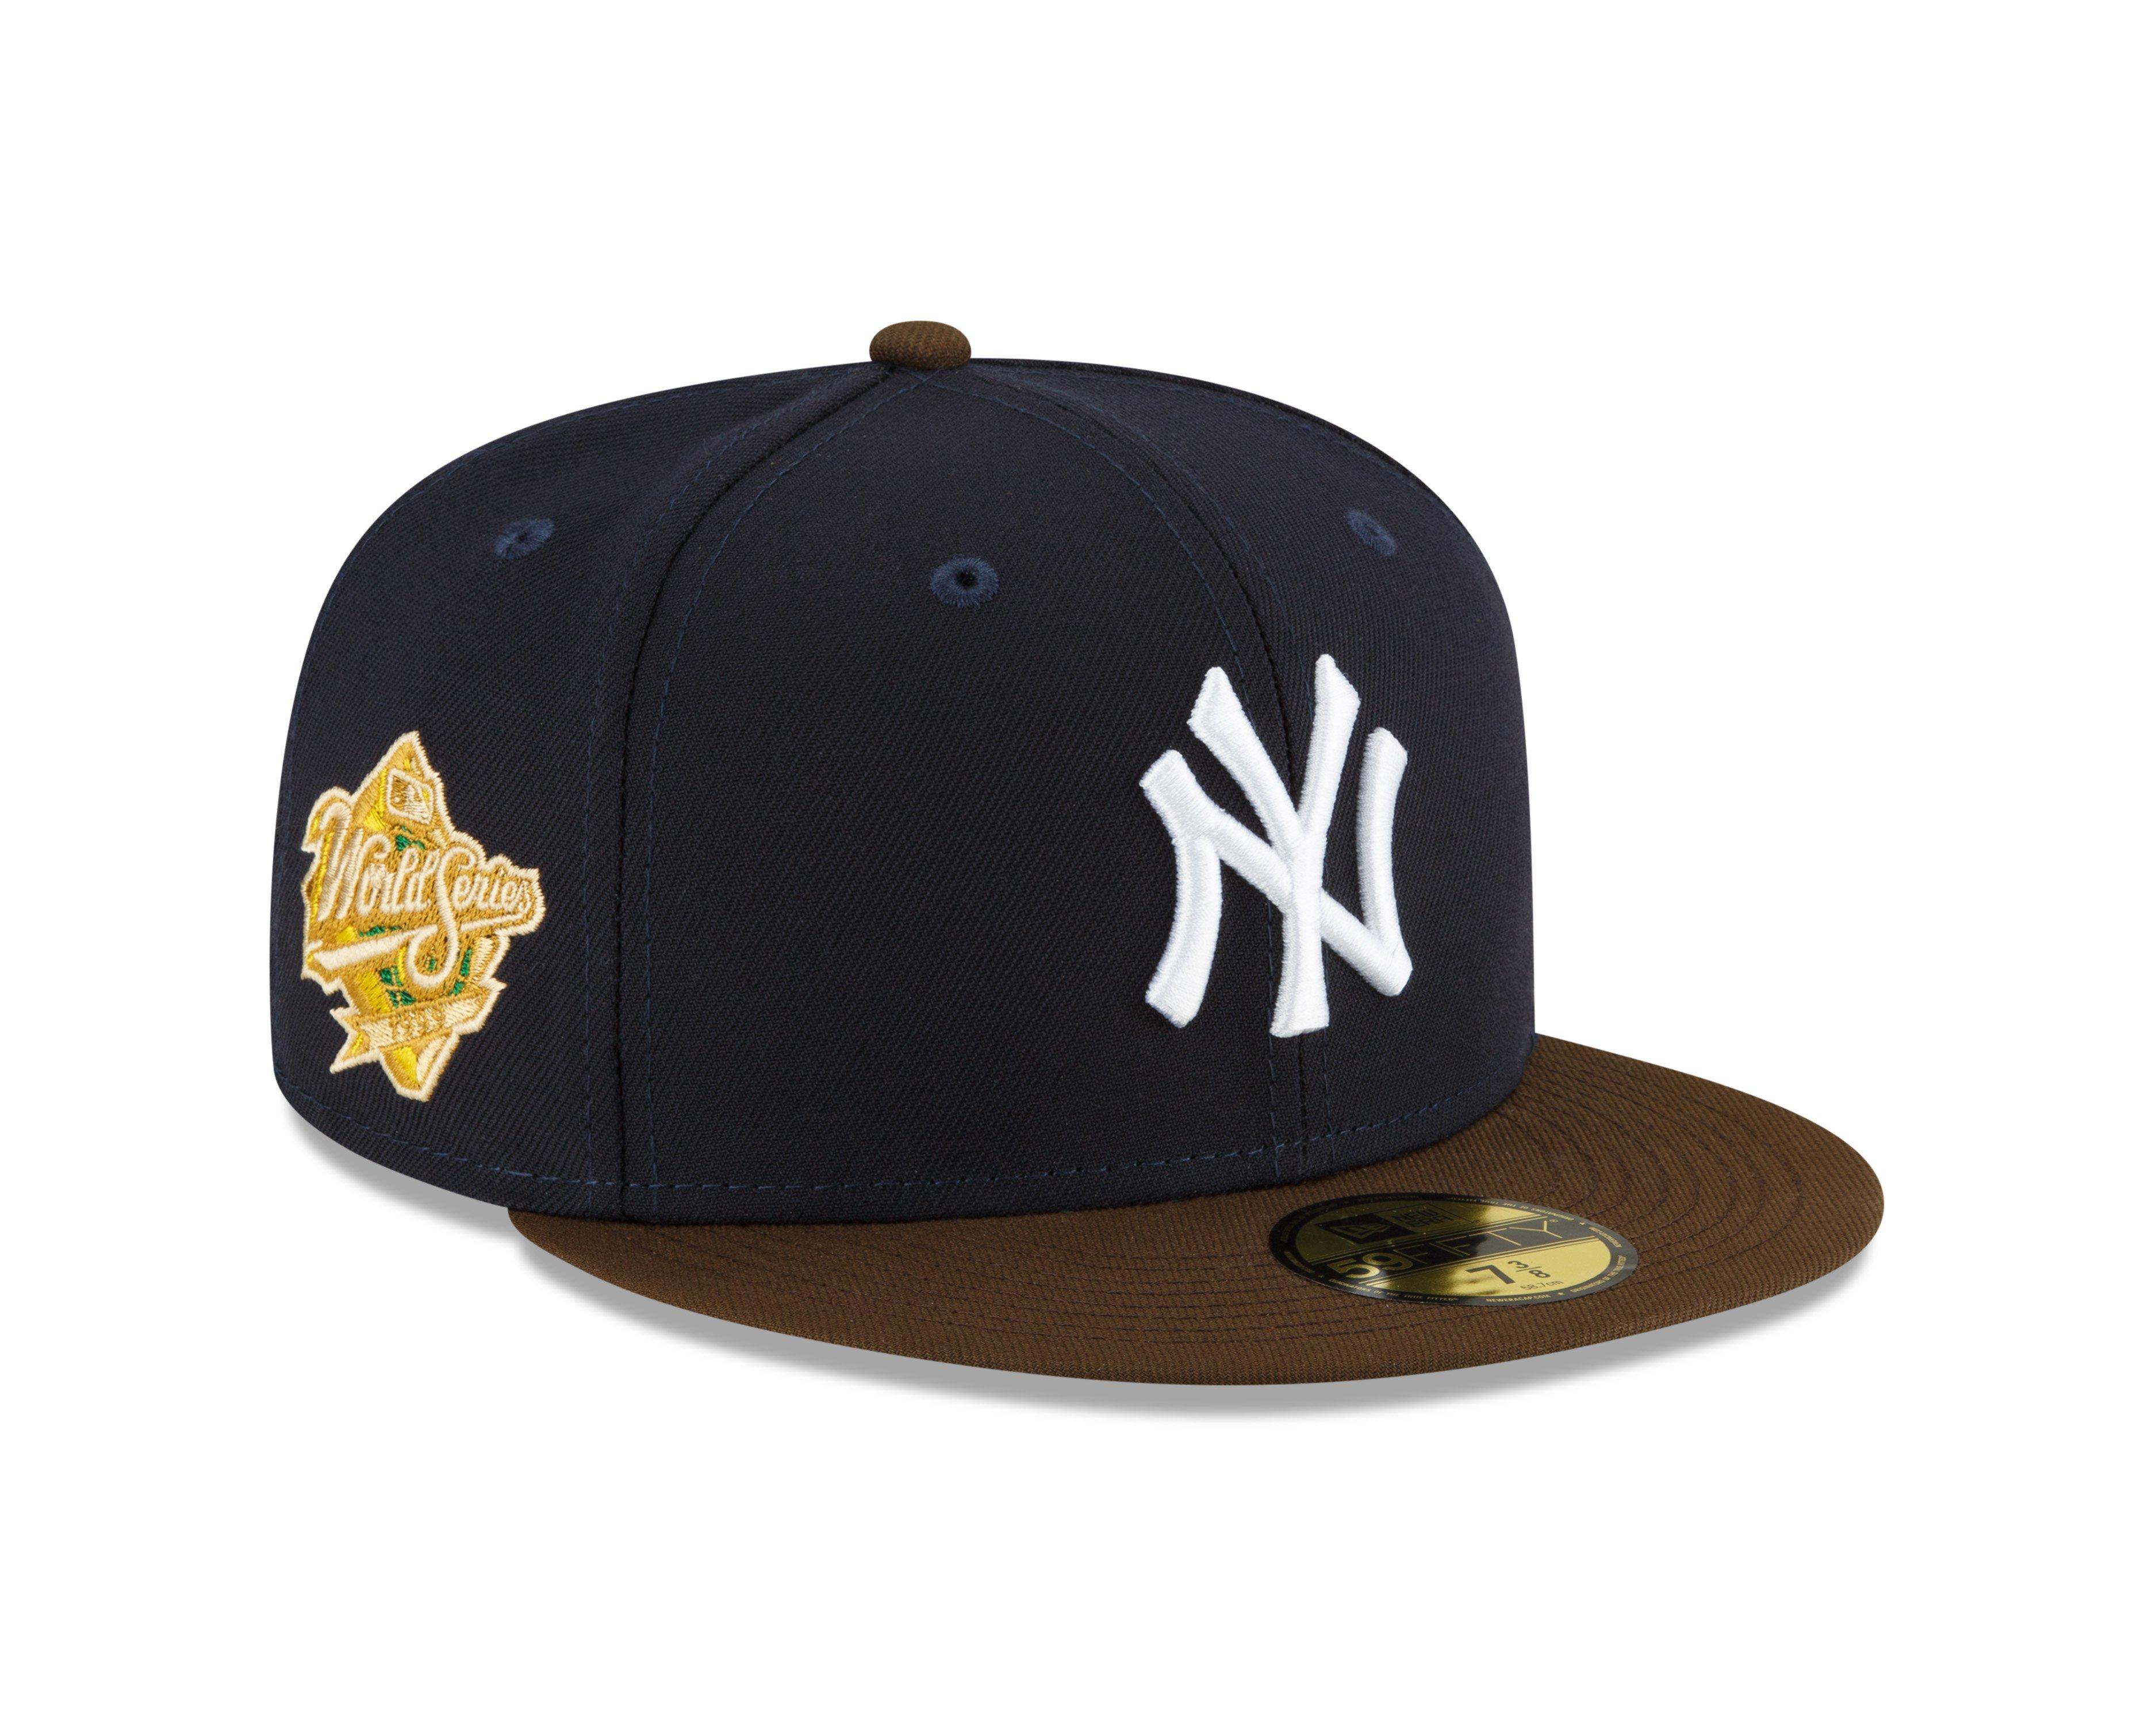 New Era Mens Mlb Ny Yankees Fitted Hat Brown/White